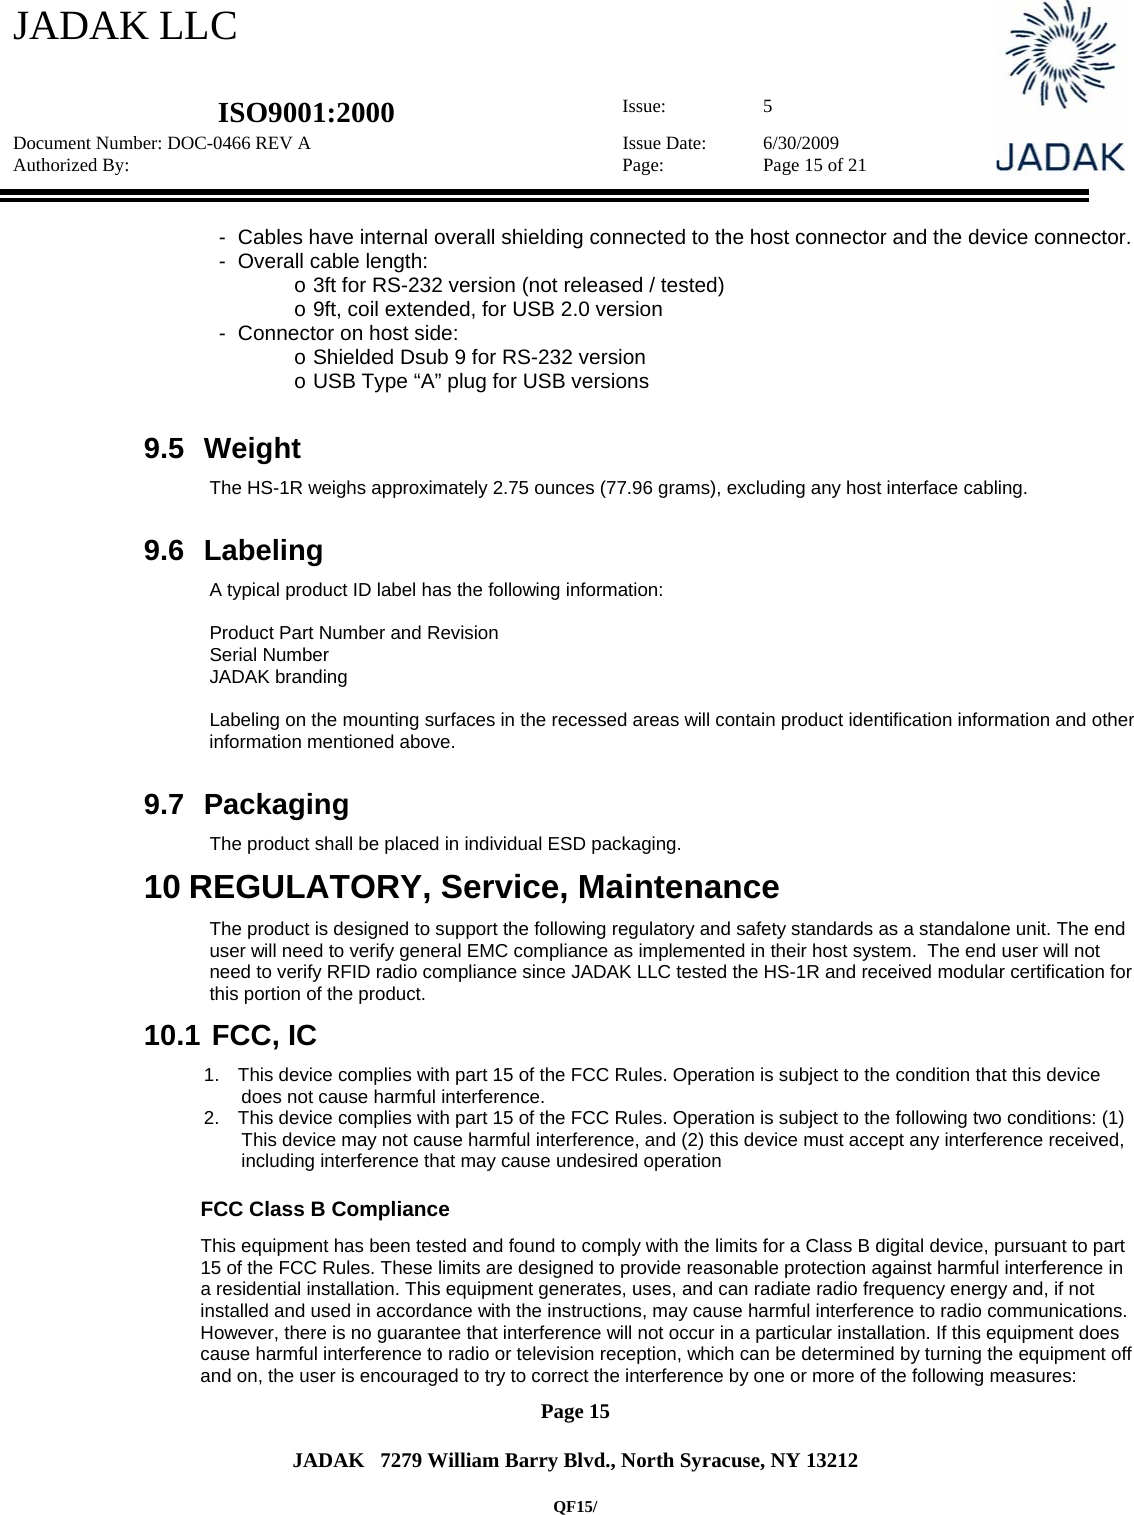 JADAK LLC   ISO9001:2000  Issue: 5 Document Number: DOC-0466 REV A  Issue Date:  6/30/2009 Authorized By:  Page:  Page 15 of 21       Page 15   JADAK   7279 William Barry Blvd., North Syracuse, NY 13212  QF15/ -  Cables have internal overall shielding connected to the host connector and the device connector. -  Overall cable length:  o 3ft for RS-232 version (not released / tested) o 9ft, coil extended, for USB 2.0 version -  Connector on host side: o Shielded Dsub 9 for RS-232 version o USB Type “A” plug for USB versions  9.5 Weight The HS-1R weighs approximately 2.75 ounces (77.96 grams), excluding any host interface cabling.  9.6 Labeling A typical product ID label has the following information:  Product Part Number and Revision Serial Number JADAK branding  Labeling on the mounting surfaces in the recessed areas will contain product identification information and other information mentioned above.  9.7 Packaging The product shall be placed in individual ESD packaging.   10 REGULATORY, Service, Maintenance The product is designed to support the following regulatory and safety standards as a standalone unit. The end user will need to verify general EMC compliance as implemented in their host system.  The end user will not need to verify RFID radio compliance since JADAK LLC tested the HS-1R and received modular certification for this portion of the product. 10.1  FCC, IC 1.  This device complies with part 15 of the FCC Rules. Operation is subject to the condition that this device does not cause harmful interference. 2.  This device complies with part 15 of the FCC Rules. Operation is subject to the following two conditions: (1) This device may not cause harmful interference, and (2) this device must accept any interference received, including interference that may cause undesired operation              FCC Class B Compliance  This equipment has been tested and found to comply with the limits for a Class B digital device, pursuant to part 15 of the FCC Rules. These limits are designed to provide reasonable protection against harmful interference in a residential installation. This equipment generates, uses, and can radiate radio frequency energy and, if not installed and used in accordance with the instructions, may cause harmful interference to radio communications. However, there is no guarantee that interference will not occur in a particular installation. If this equipment does cause harmful interference to radio or television reception, which can be determined by turning the equipment off and on, the user is encouraged to try to correct the interference by one or more of the following measures: 